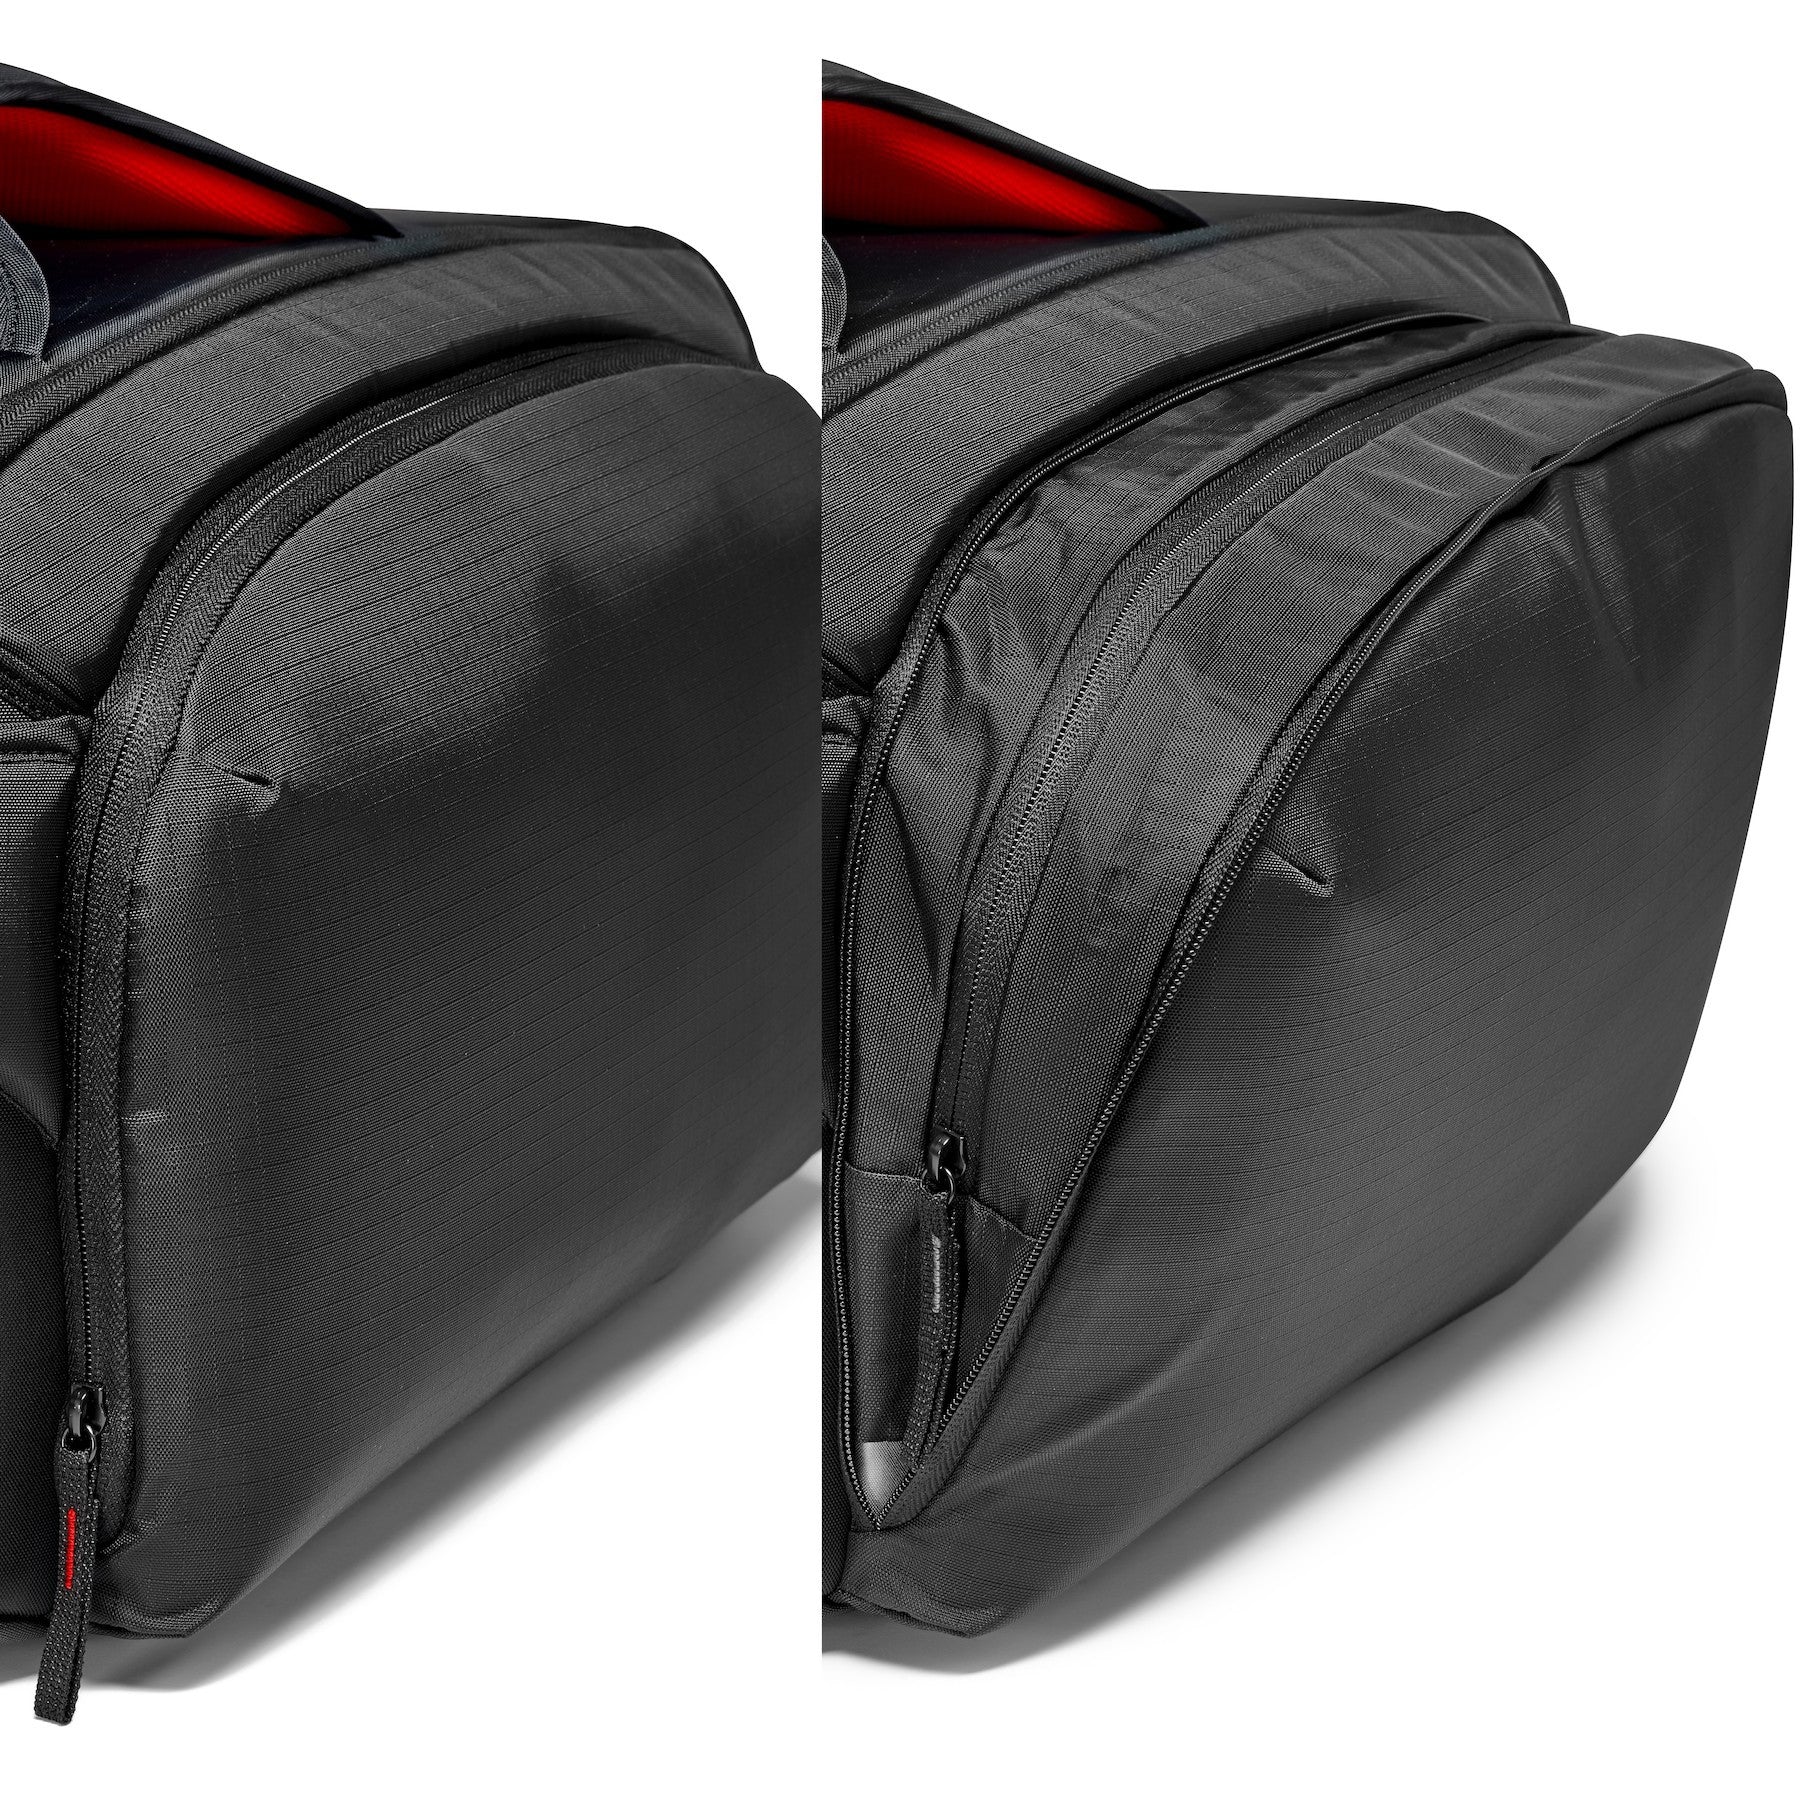 Manfrotto CC-193N Pro Light Video Case, bags shoulder bags, Manfrotto - Pictureline  - 5